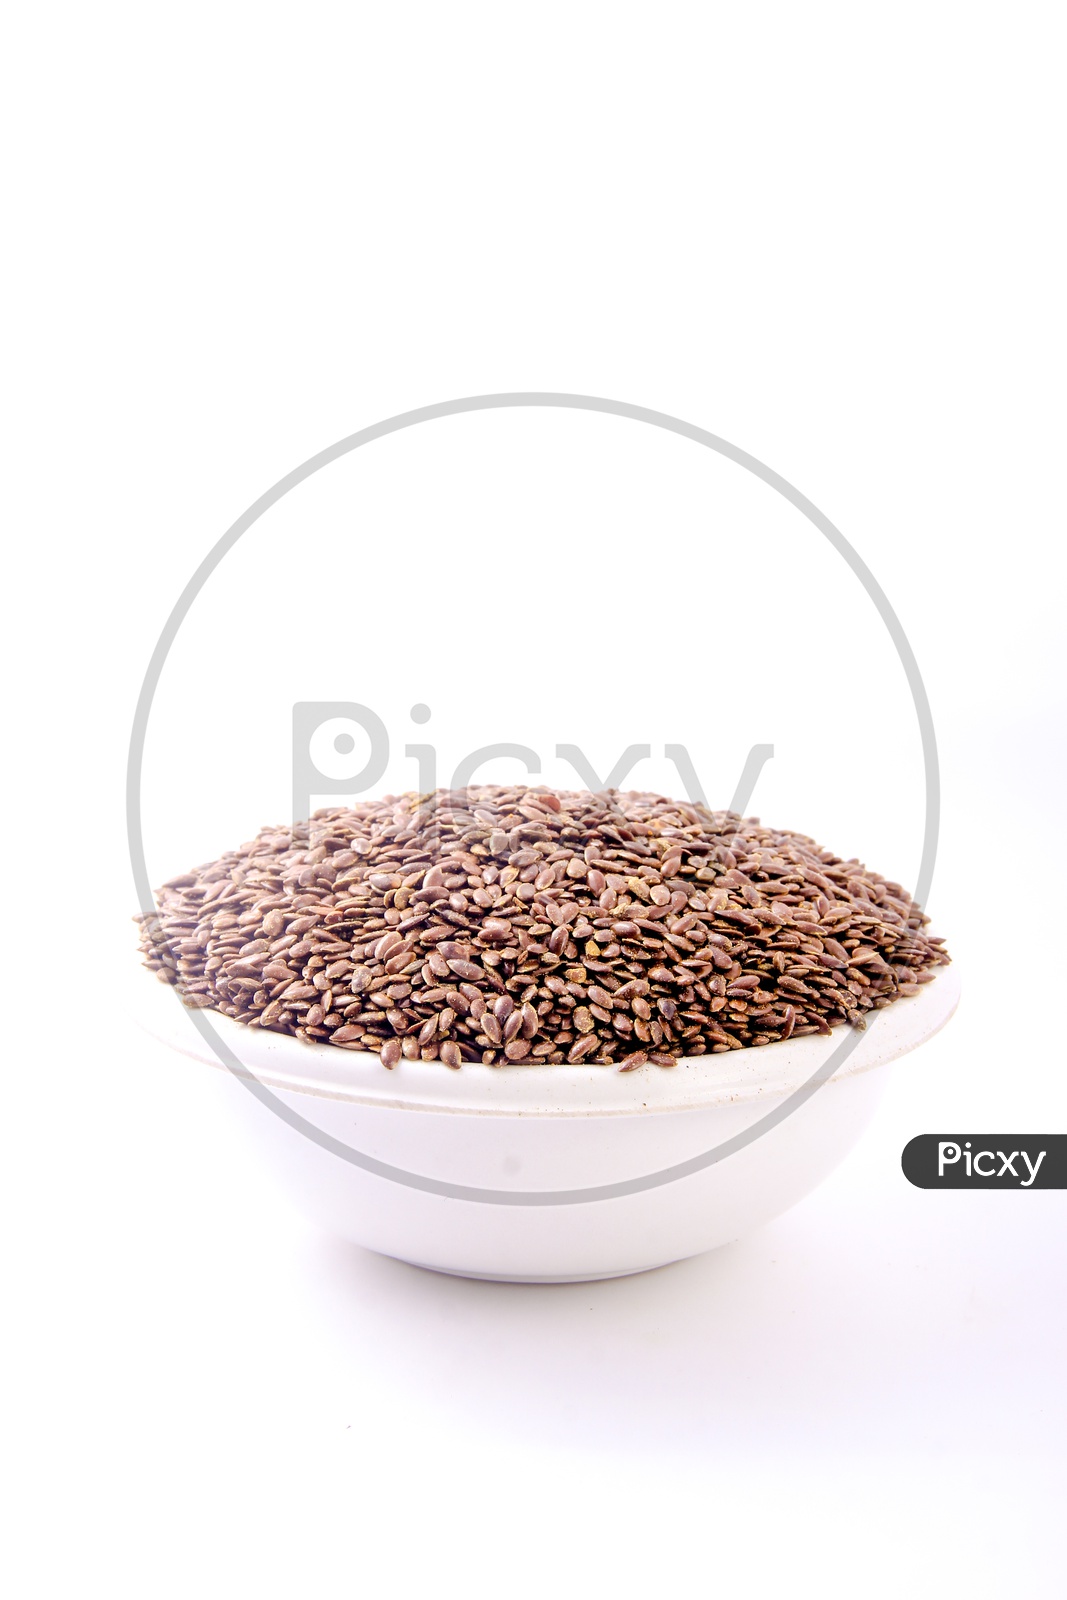 Flax Seeds in a Bowl On an Isolated White Background